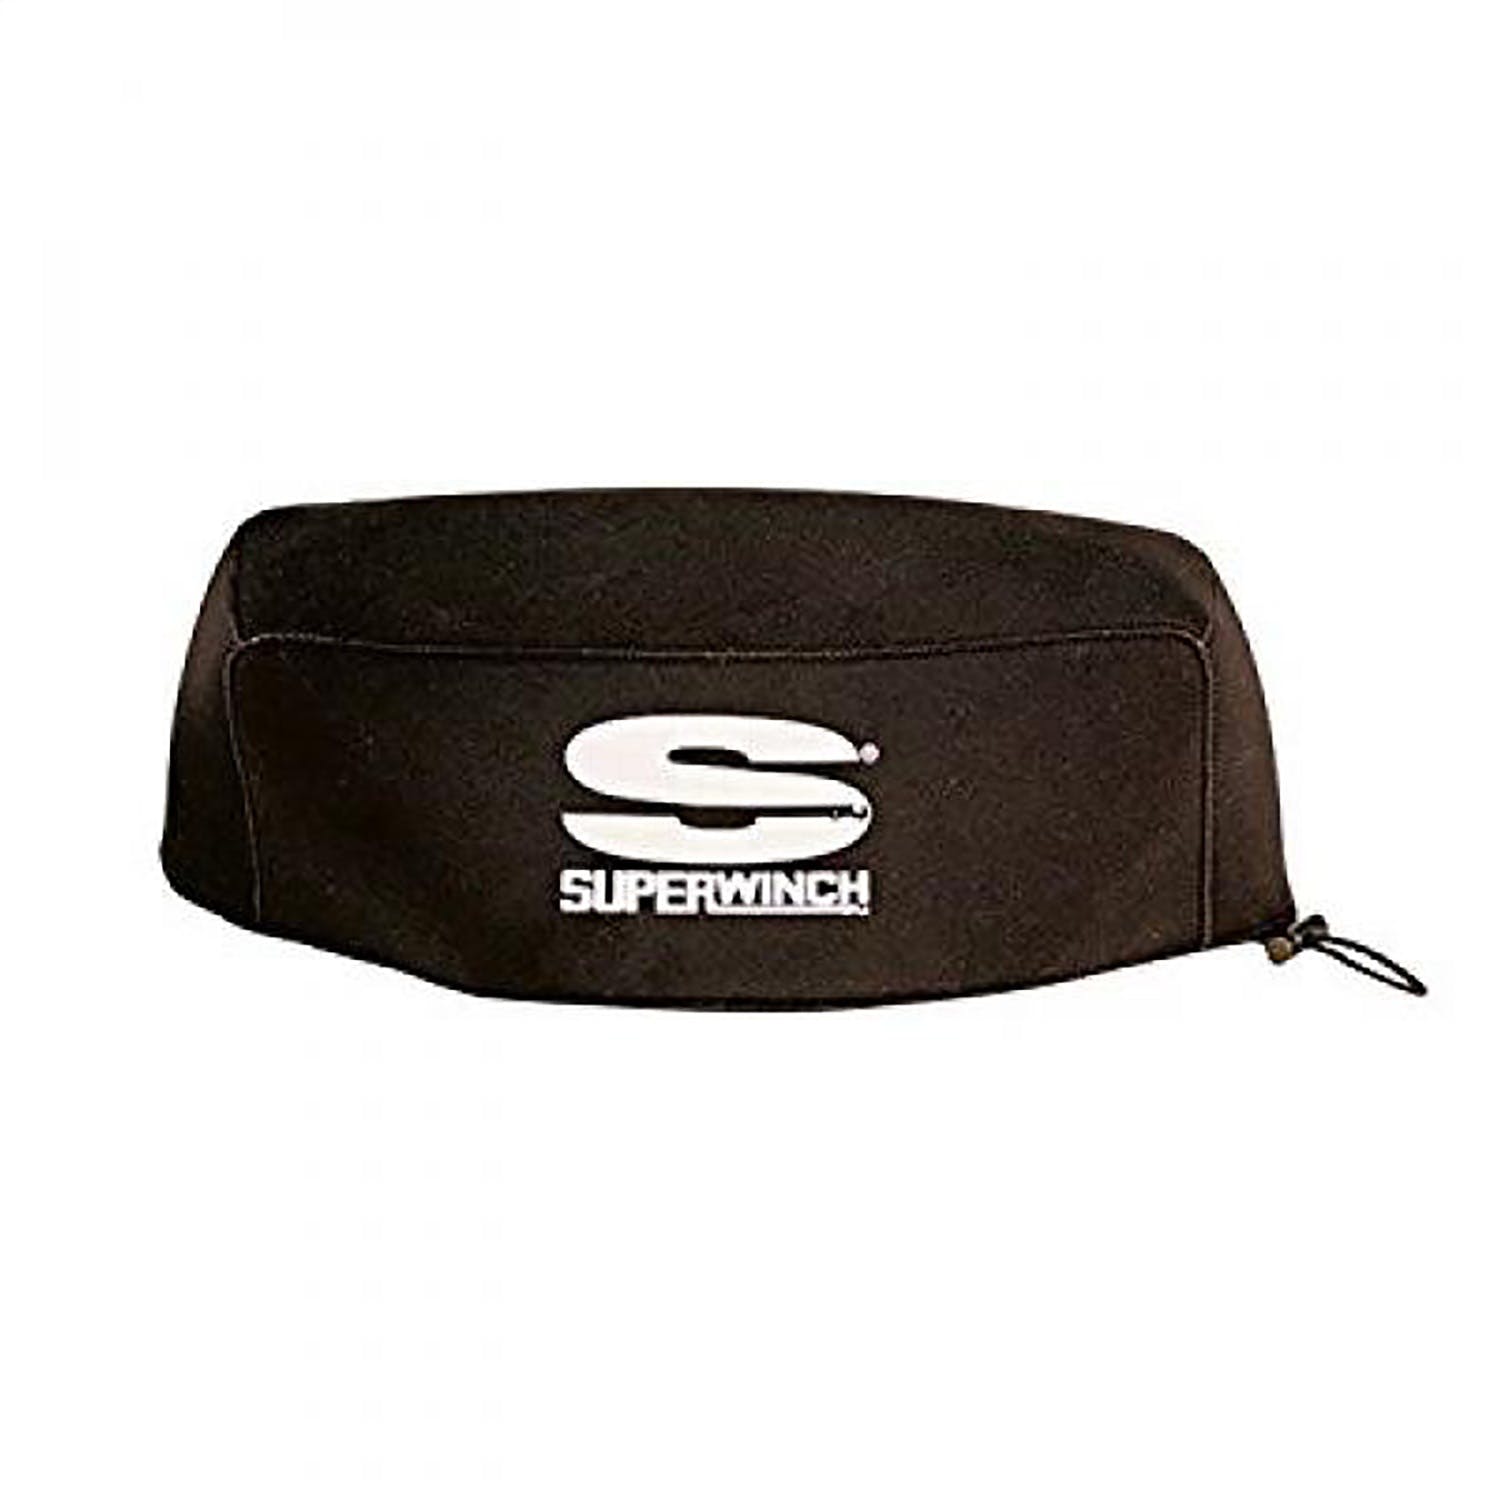 Superwinch 2302297 Winch Cover